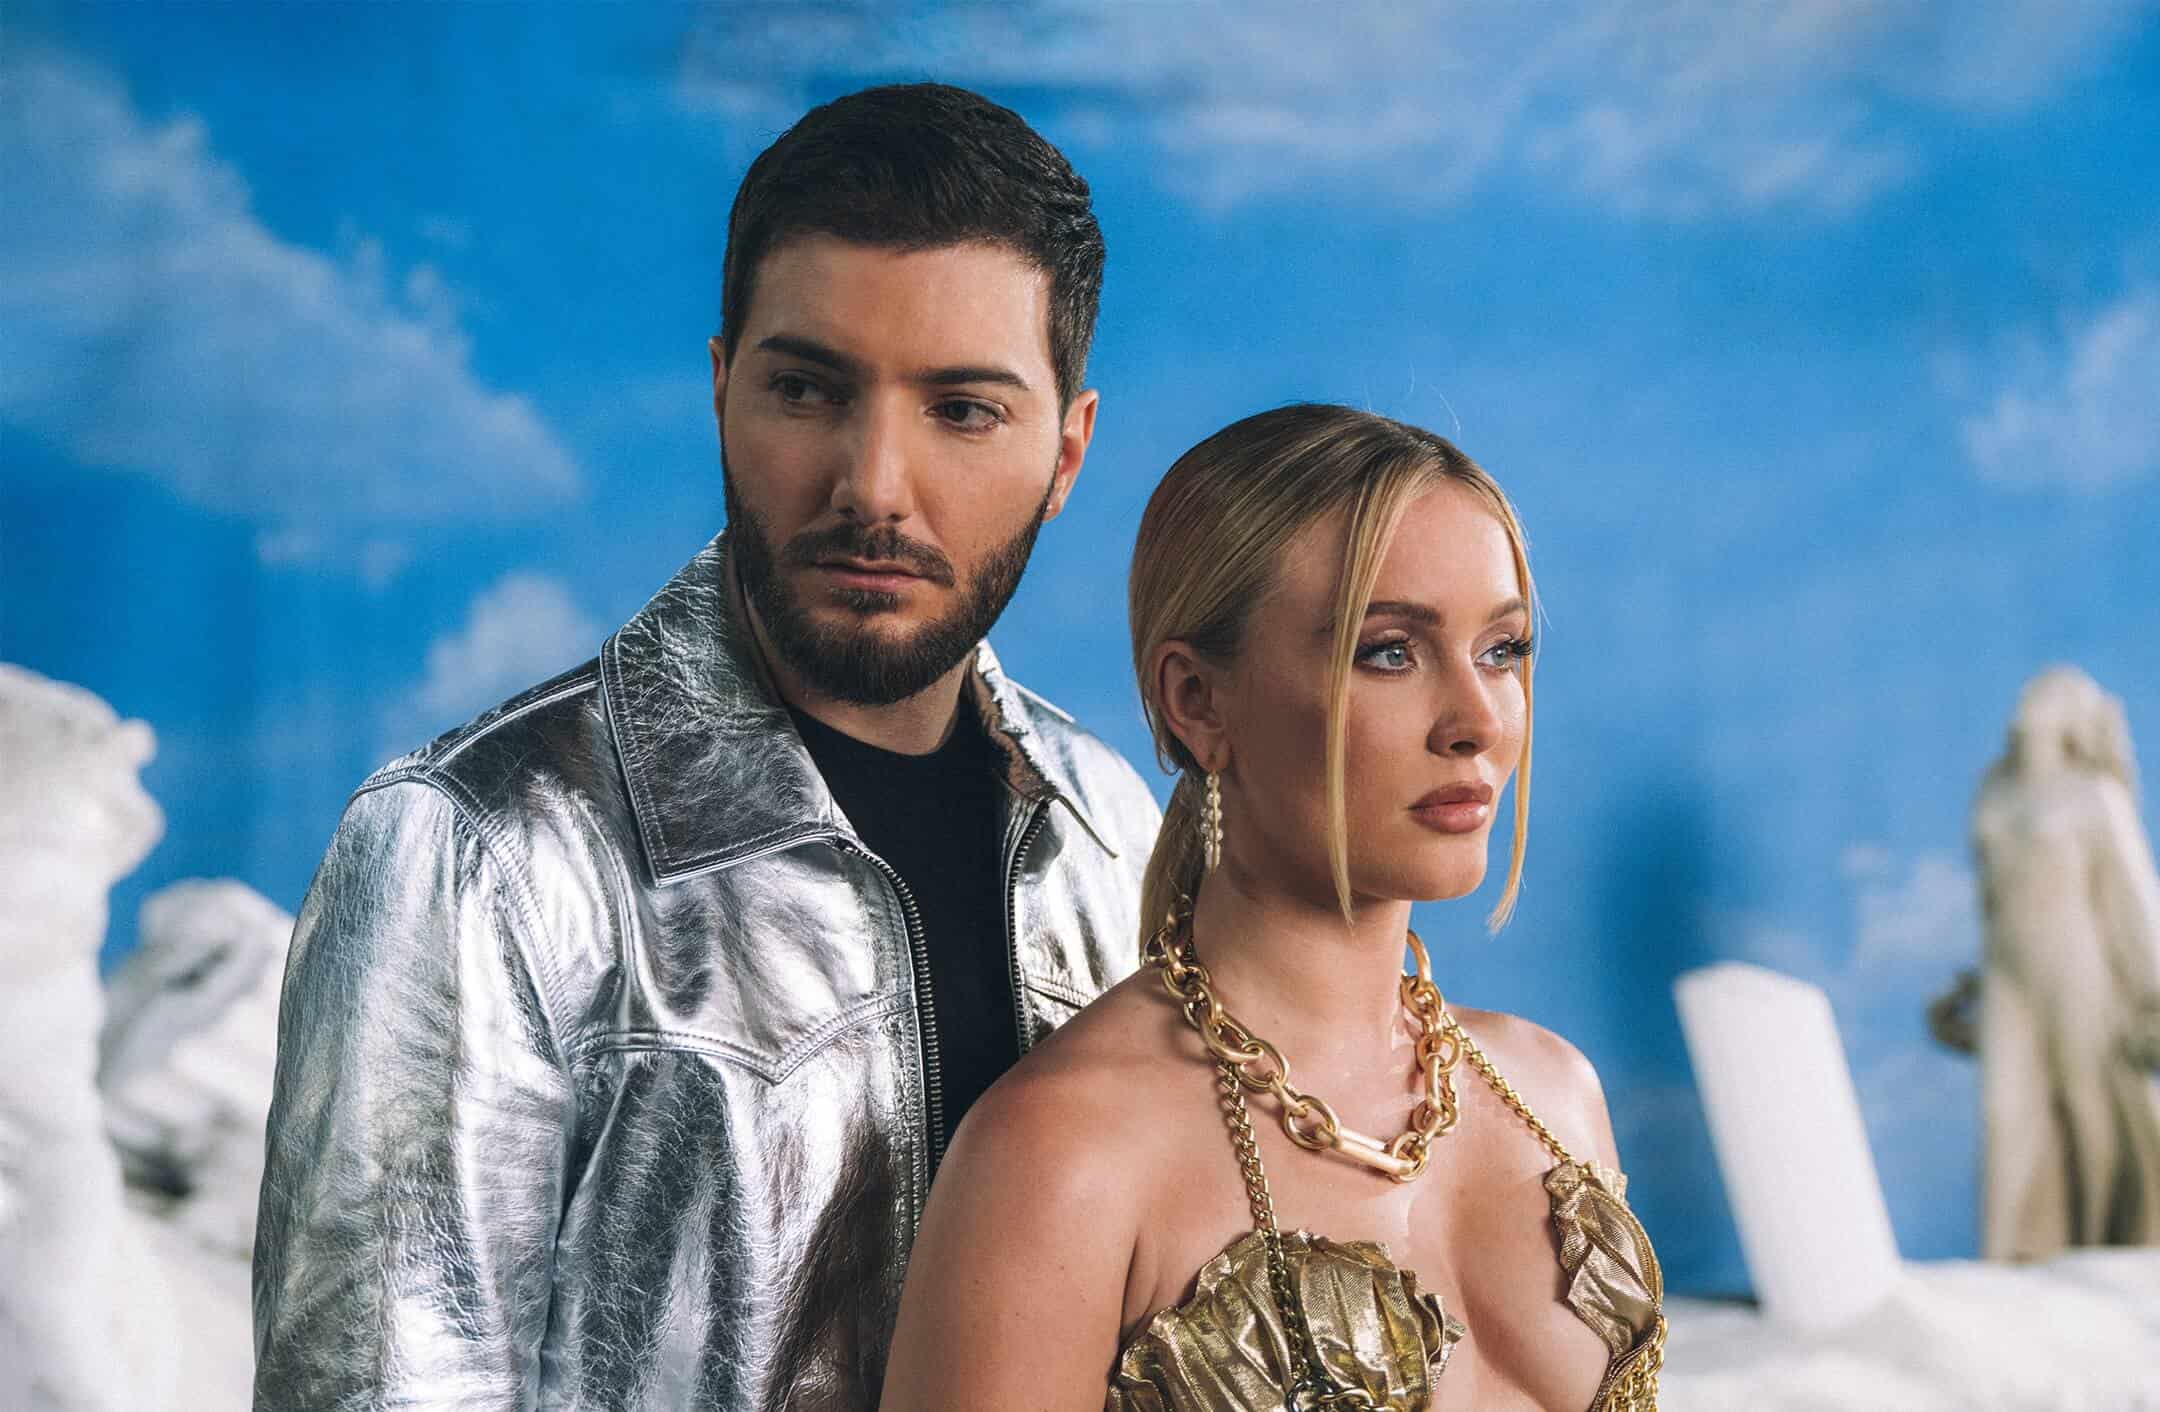 Alesso & Zara Larsson reach number 1 on US Dance Radio with ‘Words’